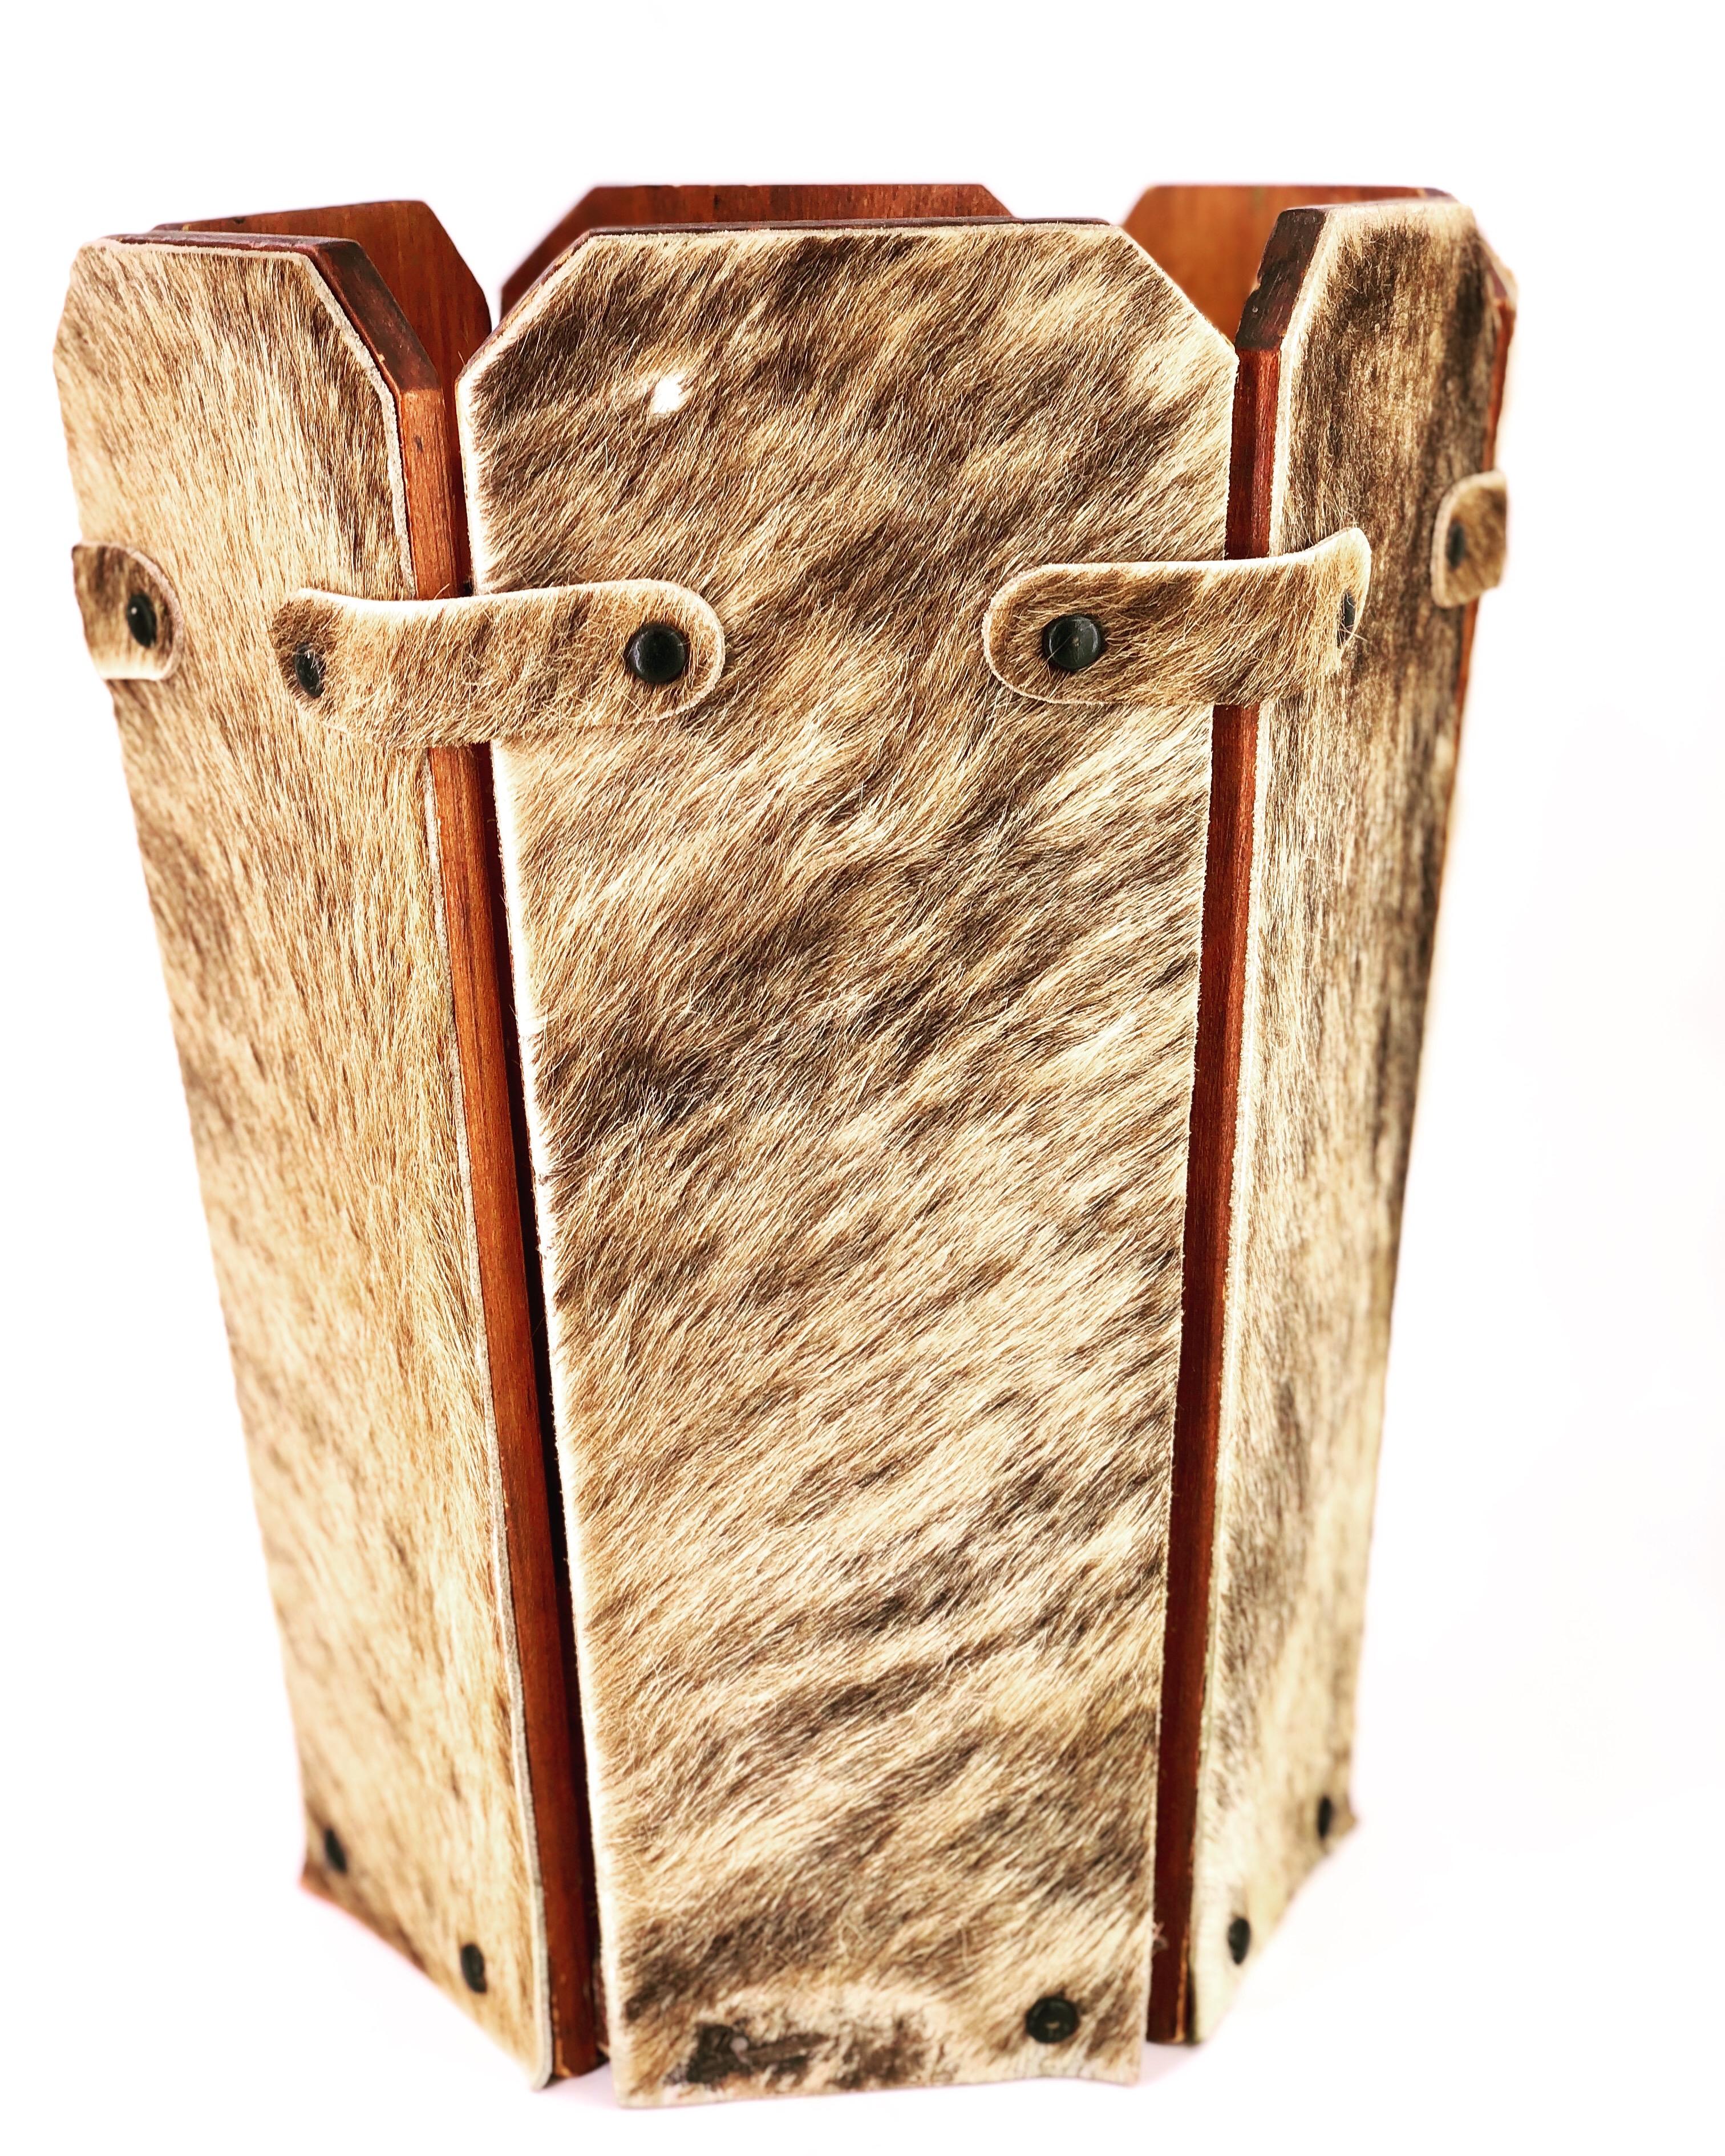 A very unique antique rustic cowhide covered wastebasket, circa 1950s, six planks of wood covered in cowhide, united with leather straps even the bottom it's covered with cowhide.